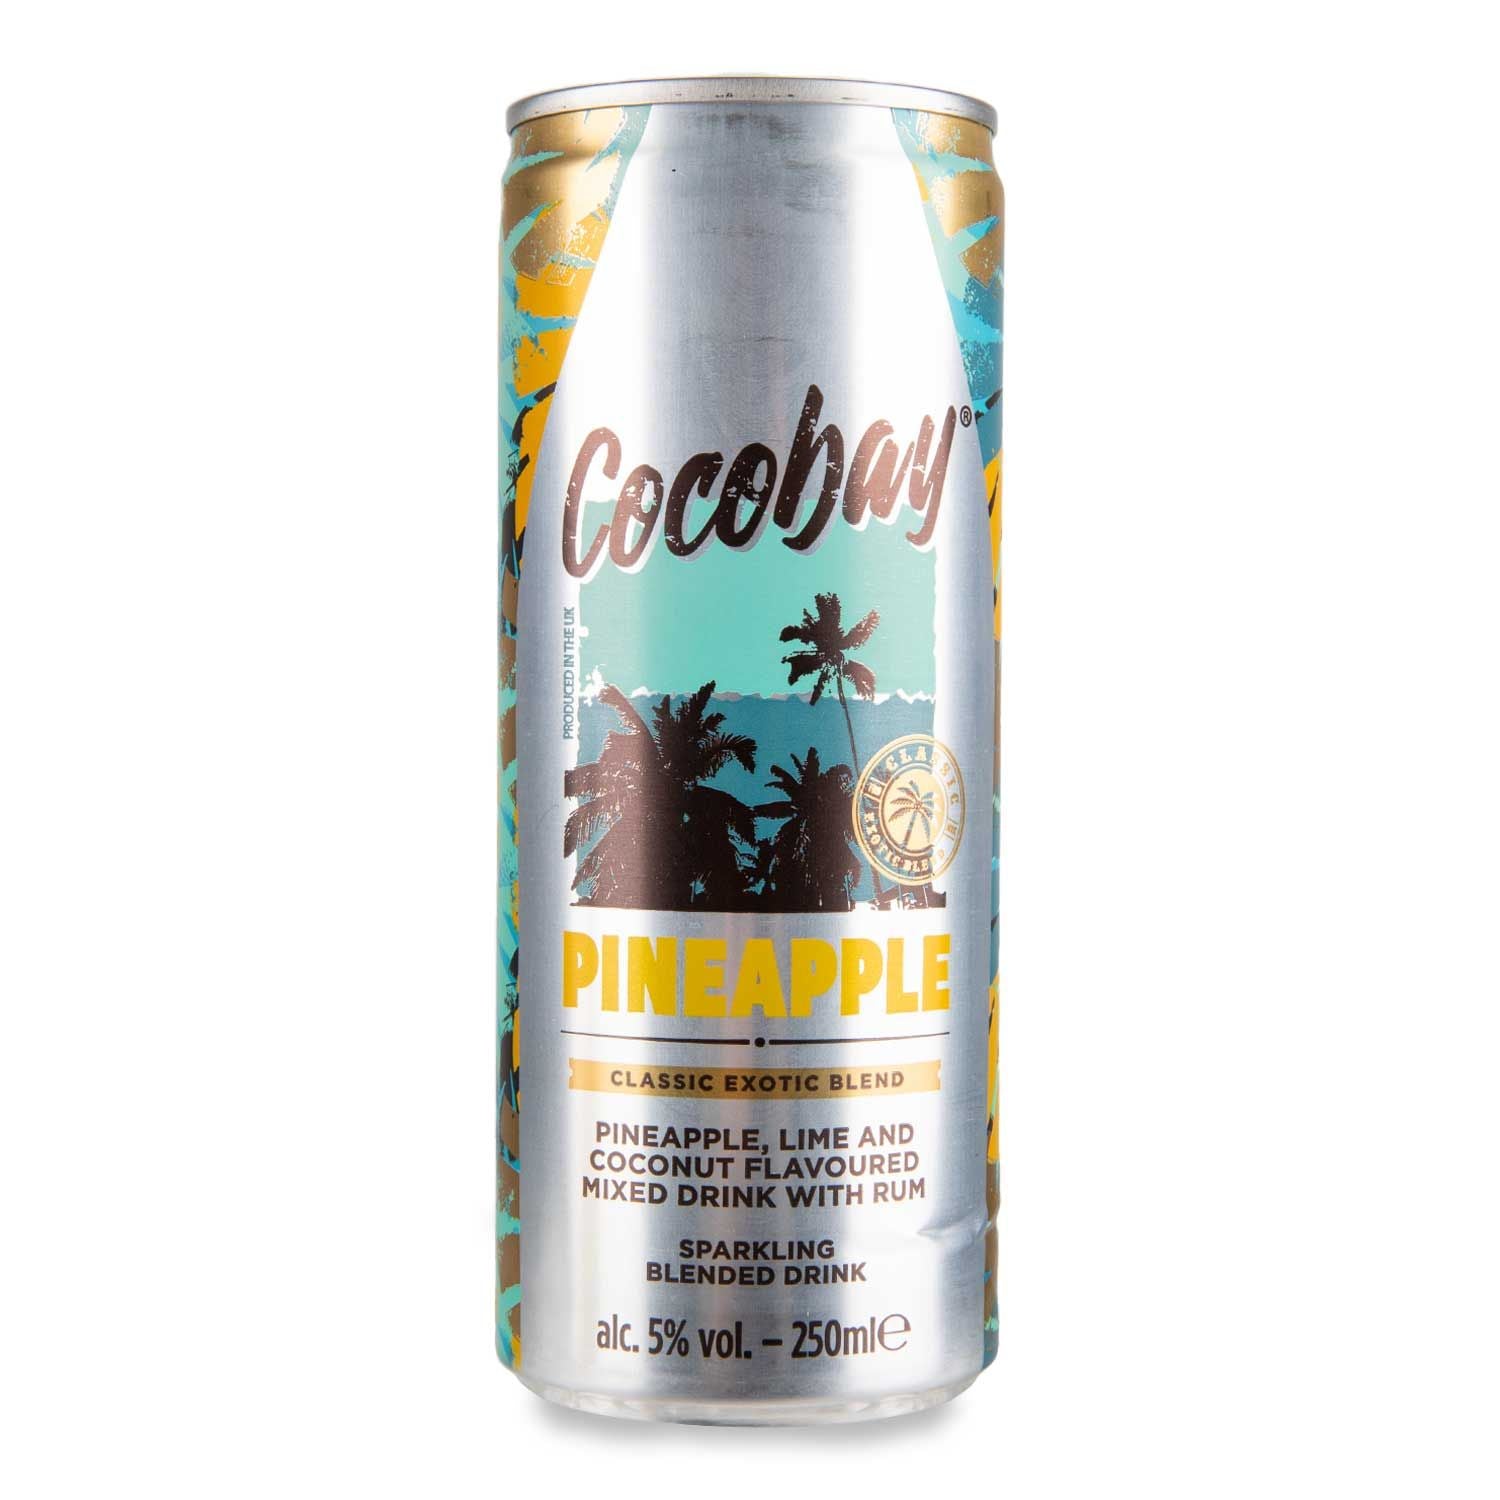 WSO  Cocobay Pineapple, Lime & Coconut Flavoured Mixed Drink With Rum 250ml 1x12